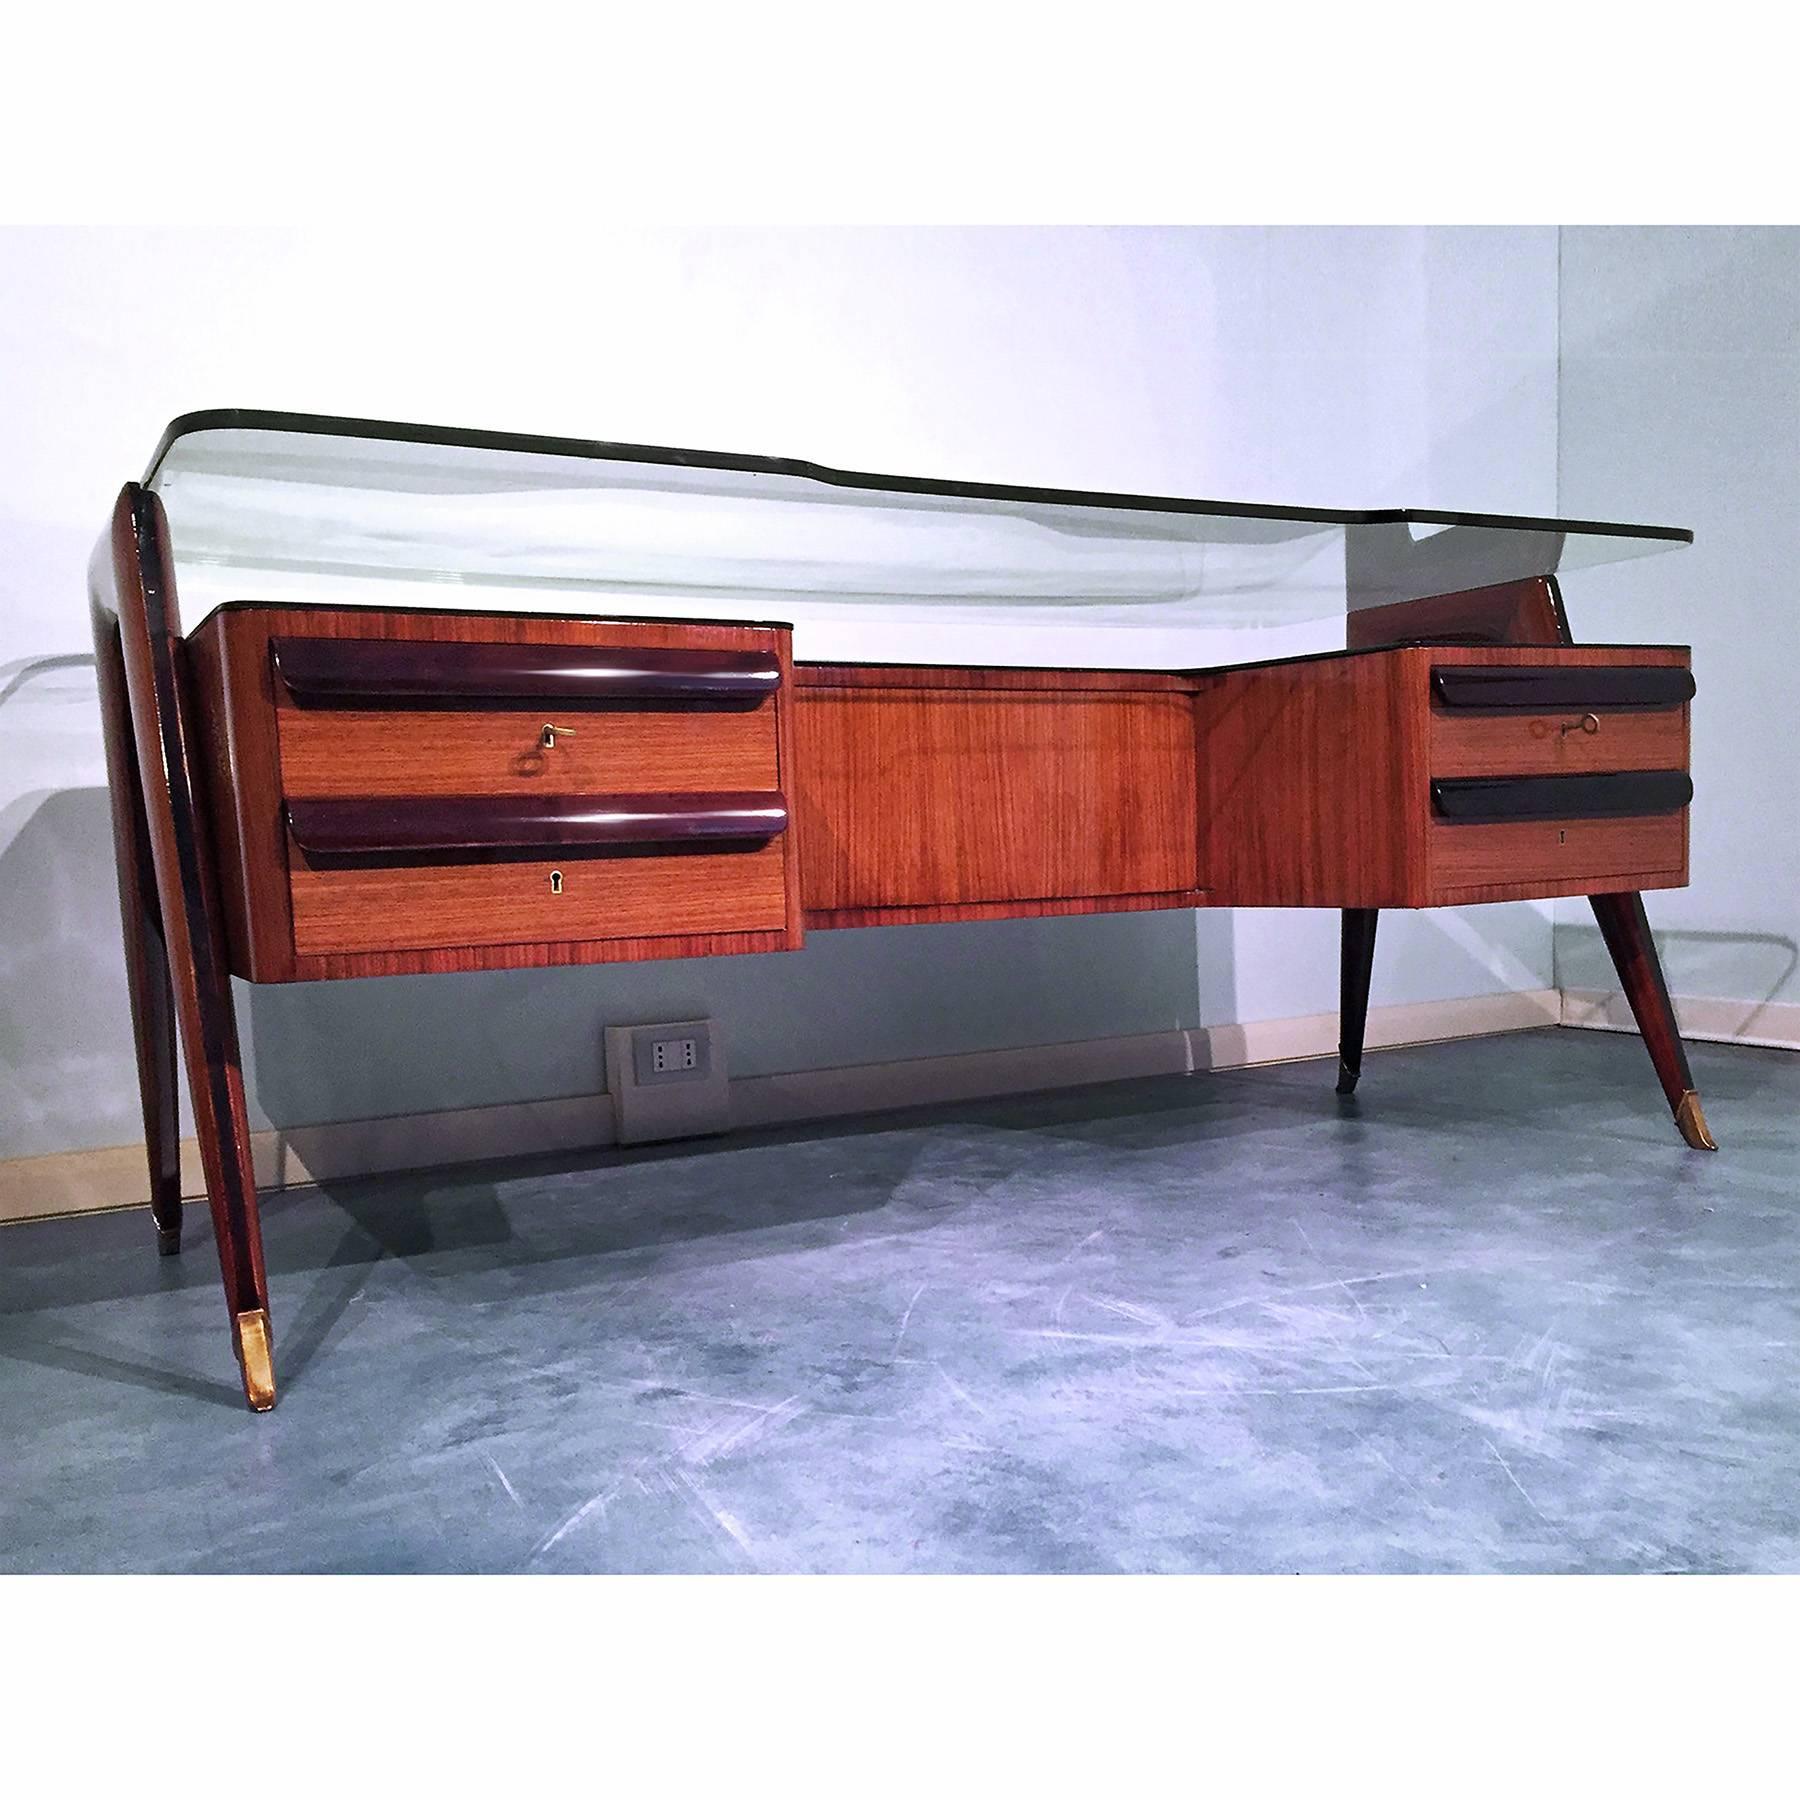 This stunning and impressive Italian executive desk is one of the masterpieces of the Italian designer Vittorio Dassi, a model type produced in Italy in the 1950s and specifically dedicated to an audience formed by professionals and senior